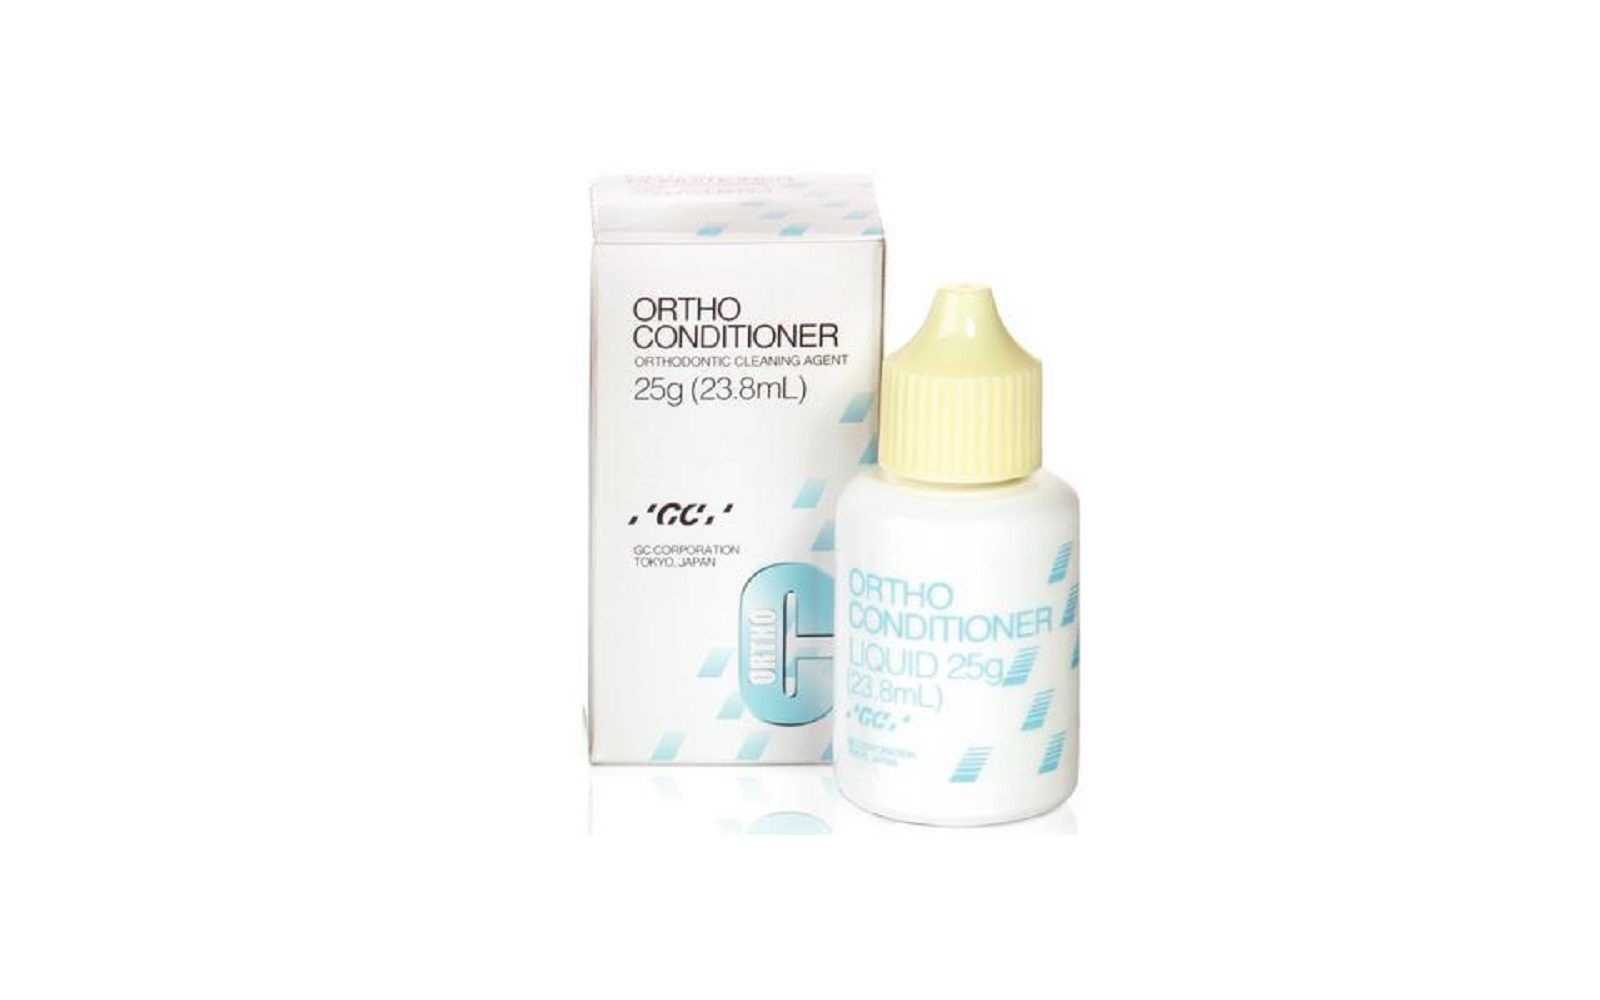 Gc fuji ortho™ lc orthodontic cement – conditioner, 25 g bottle